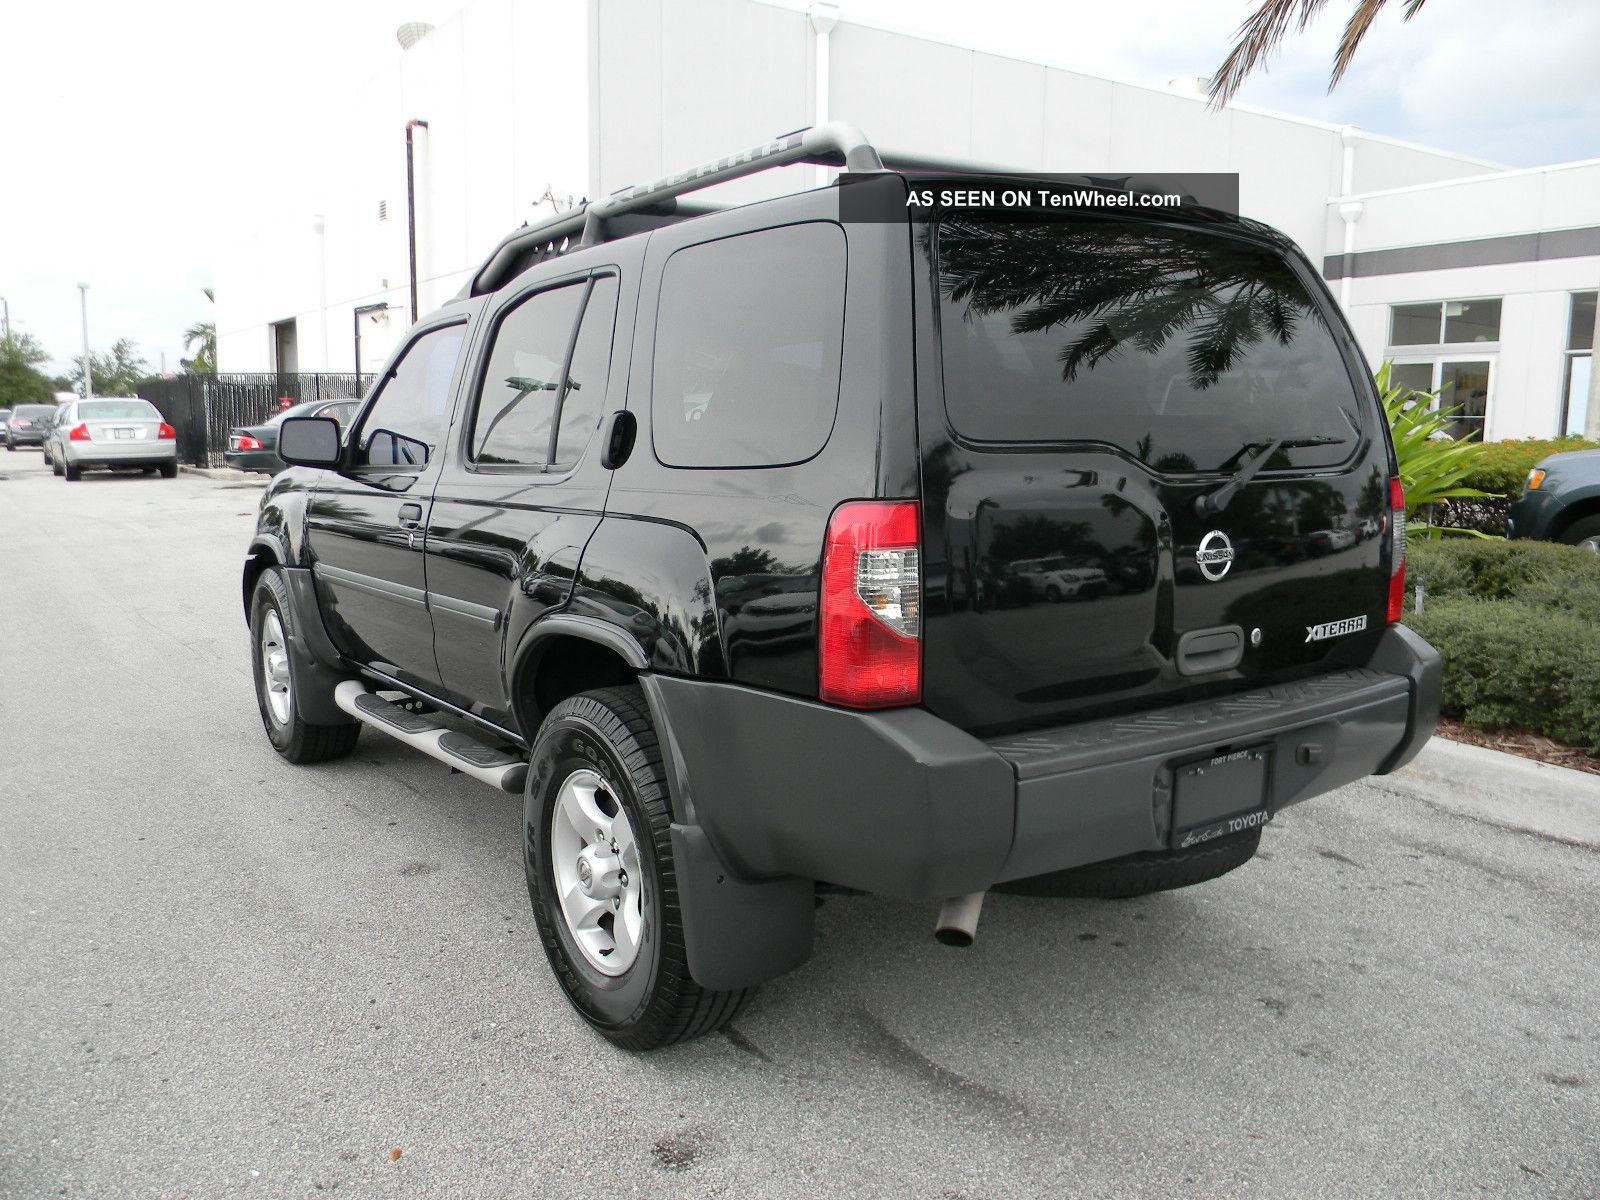 Looking for 2004 more nissan xterra sport utility vehicles #6